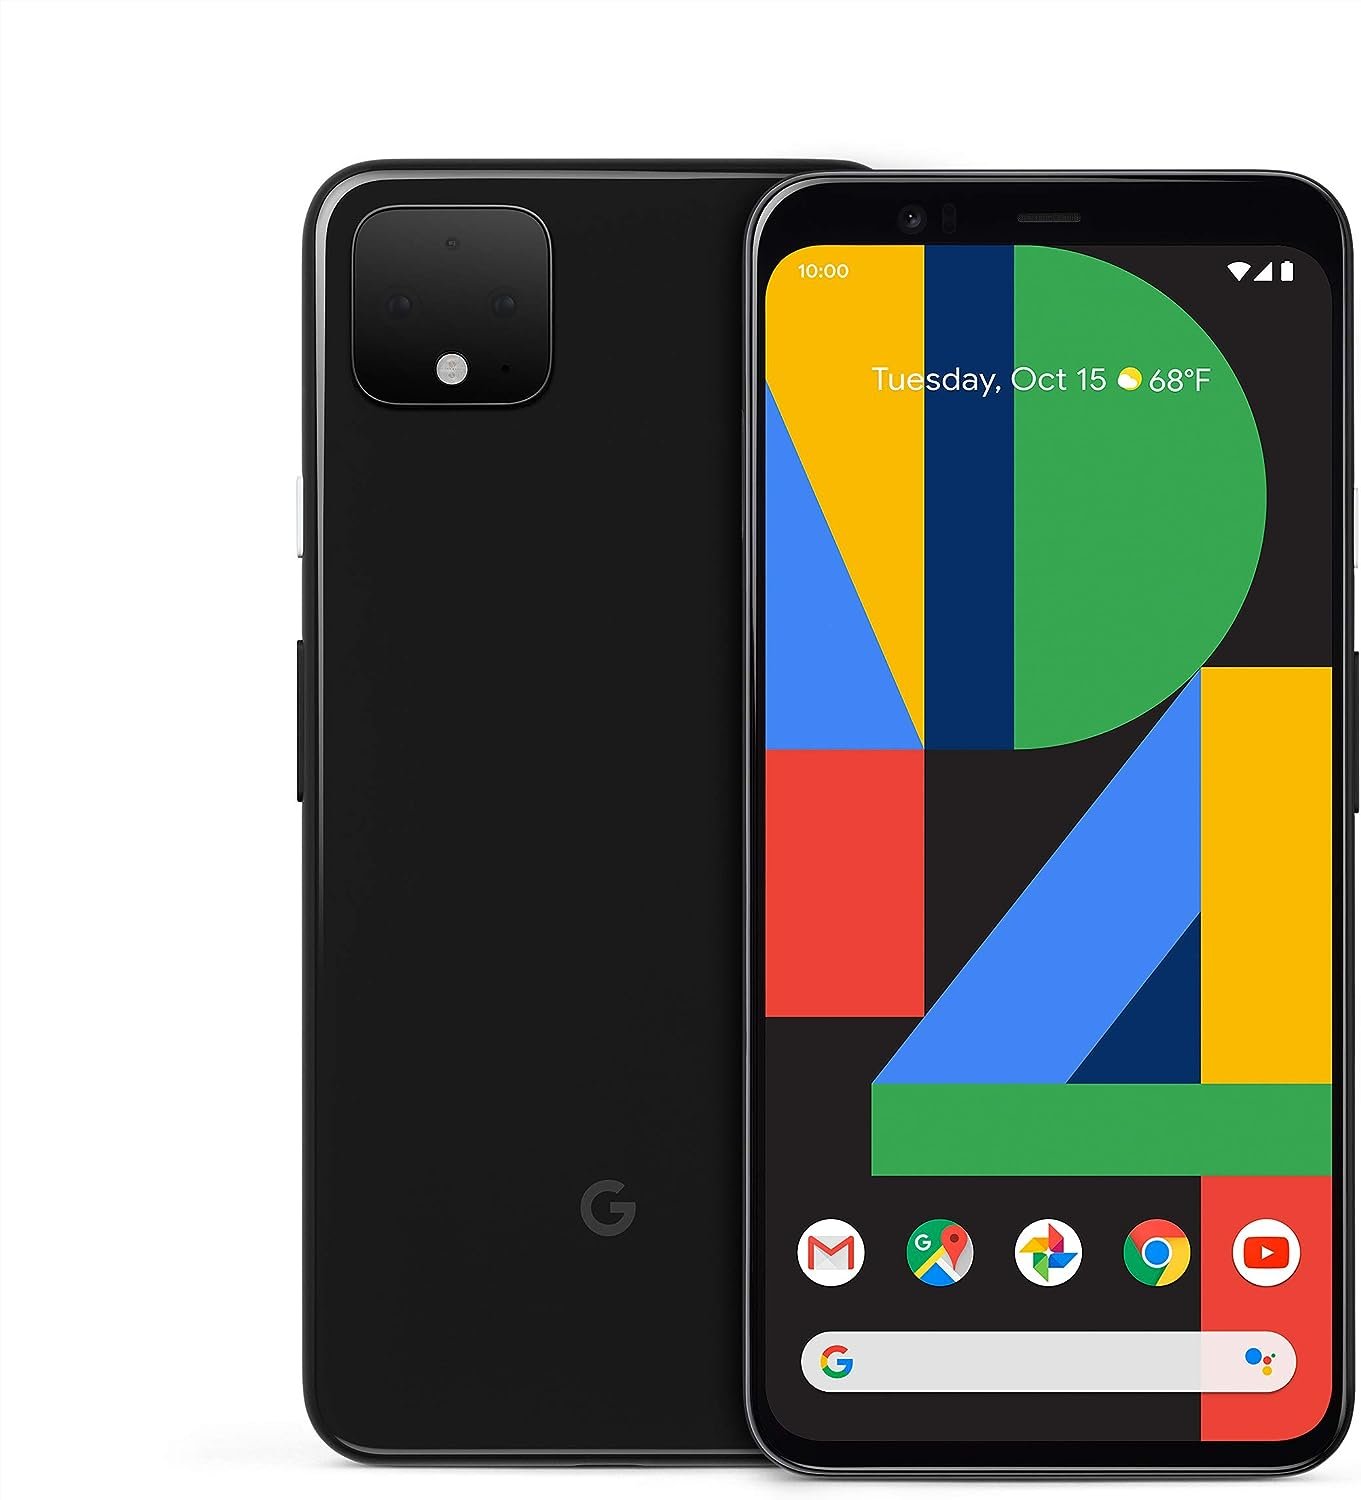 Review of the Google Pixel 4 XL